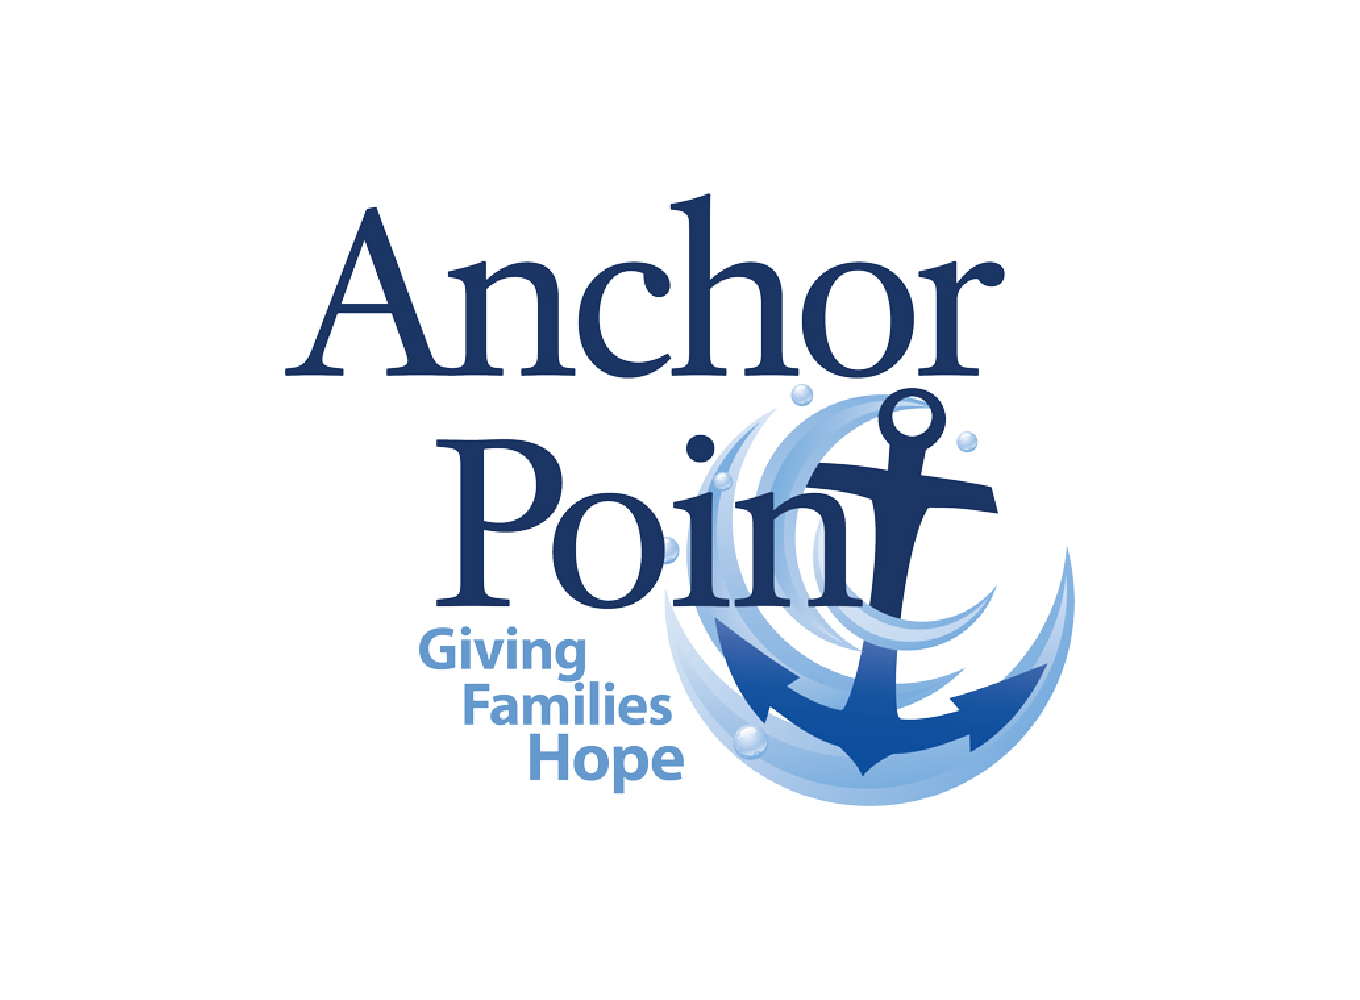 Our March Charity: Anchor Point